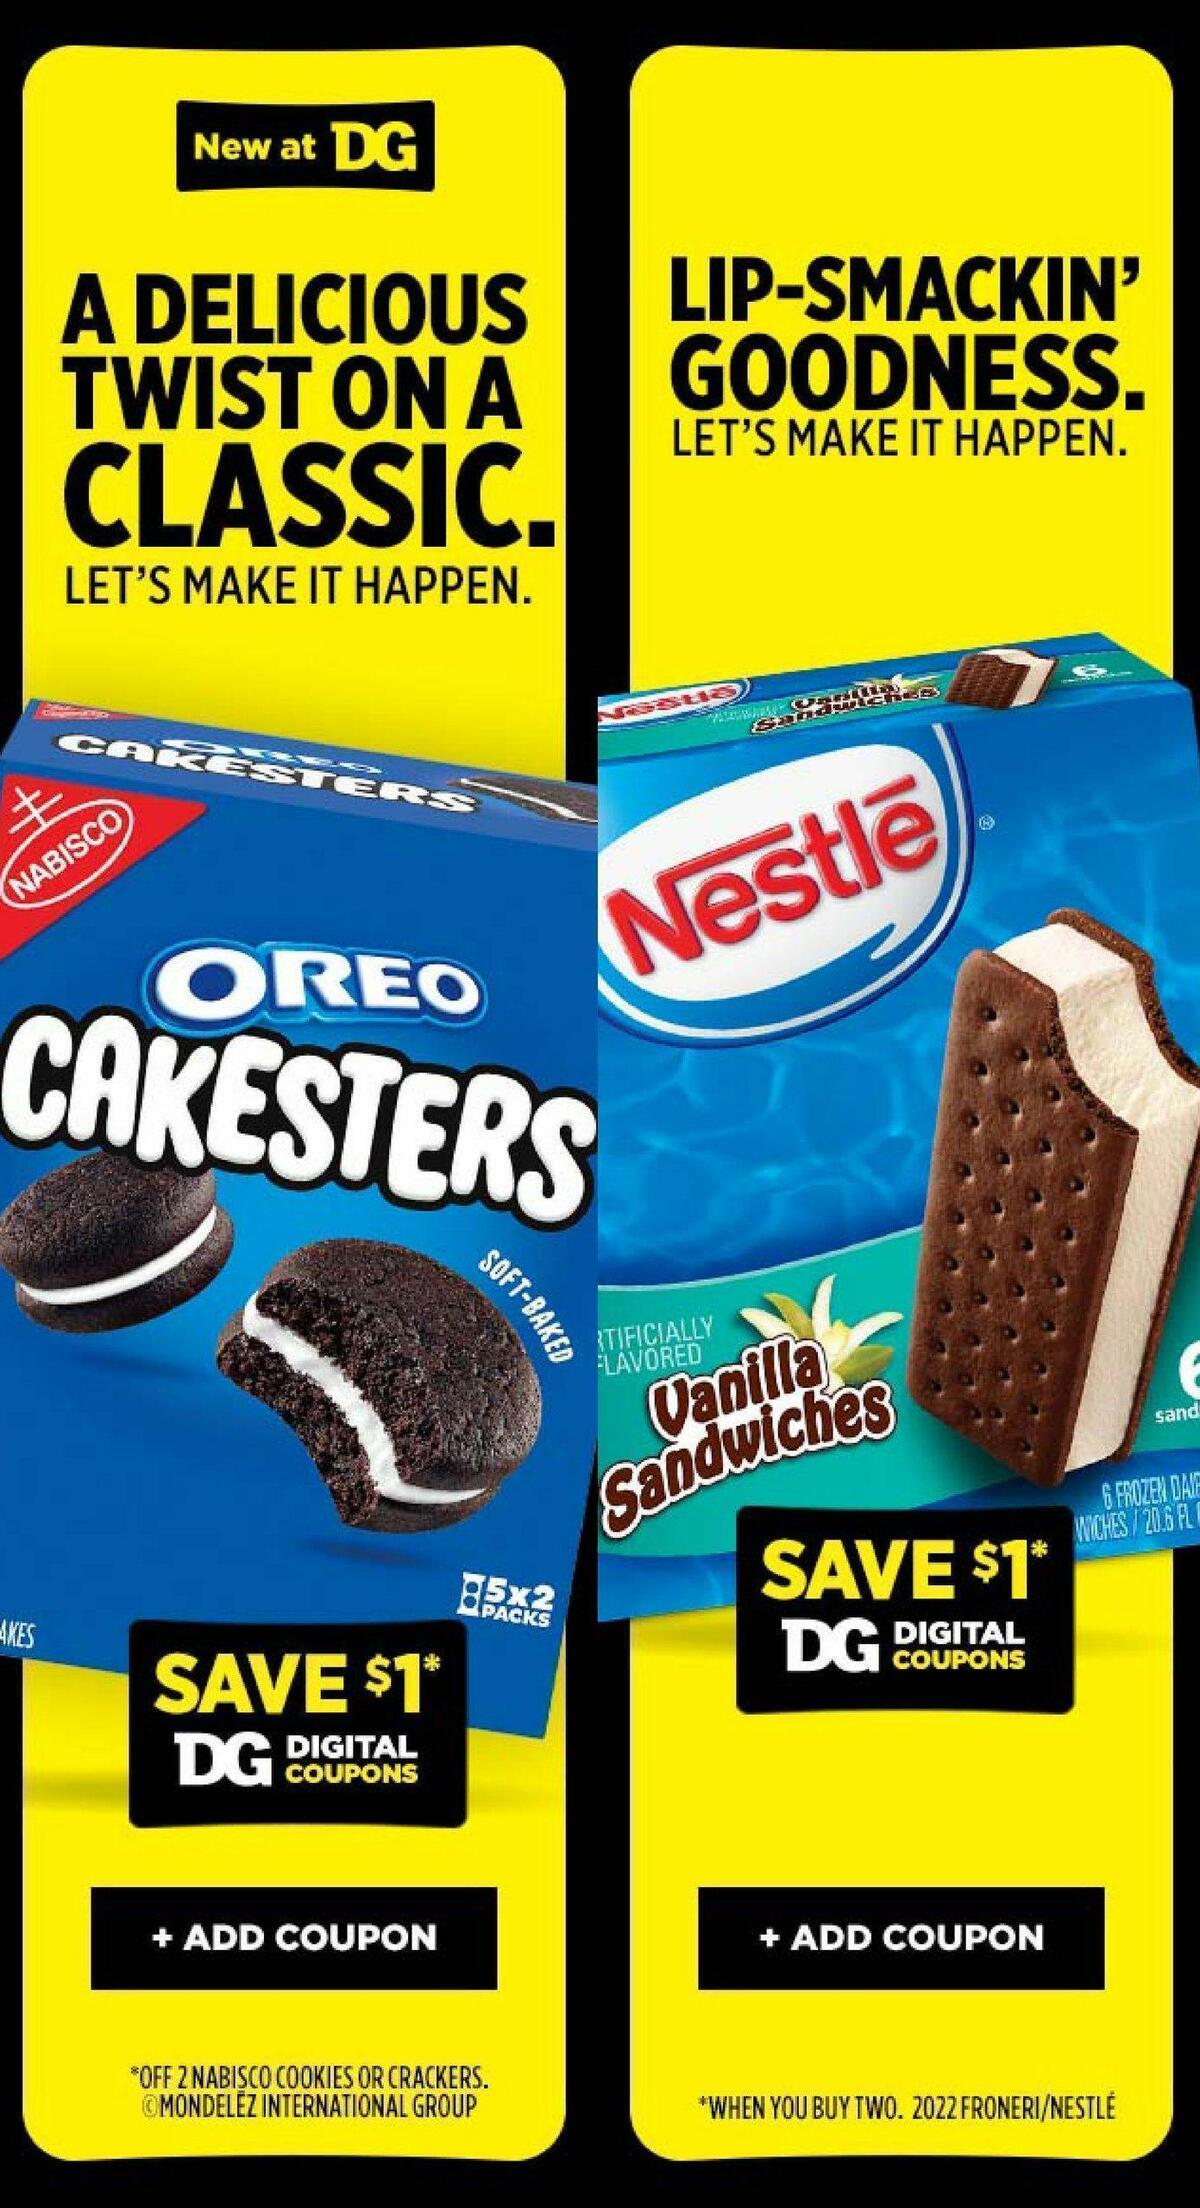 Dollar General Weekly Ad from May 22